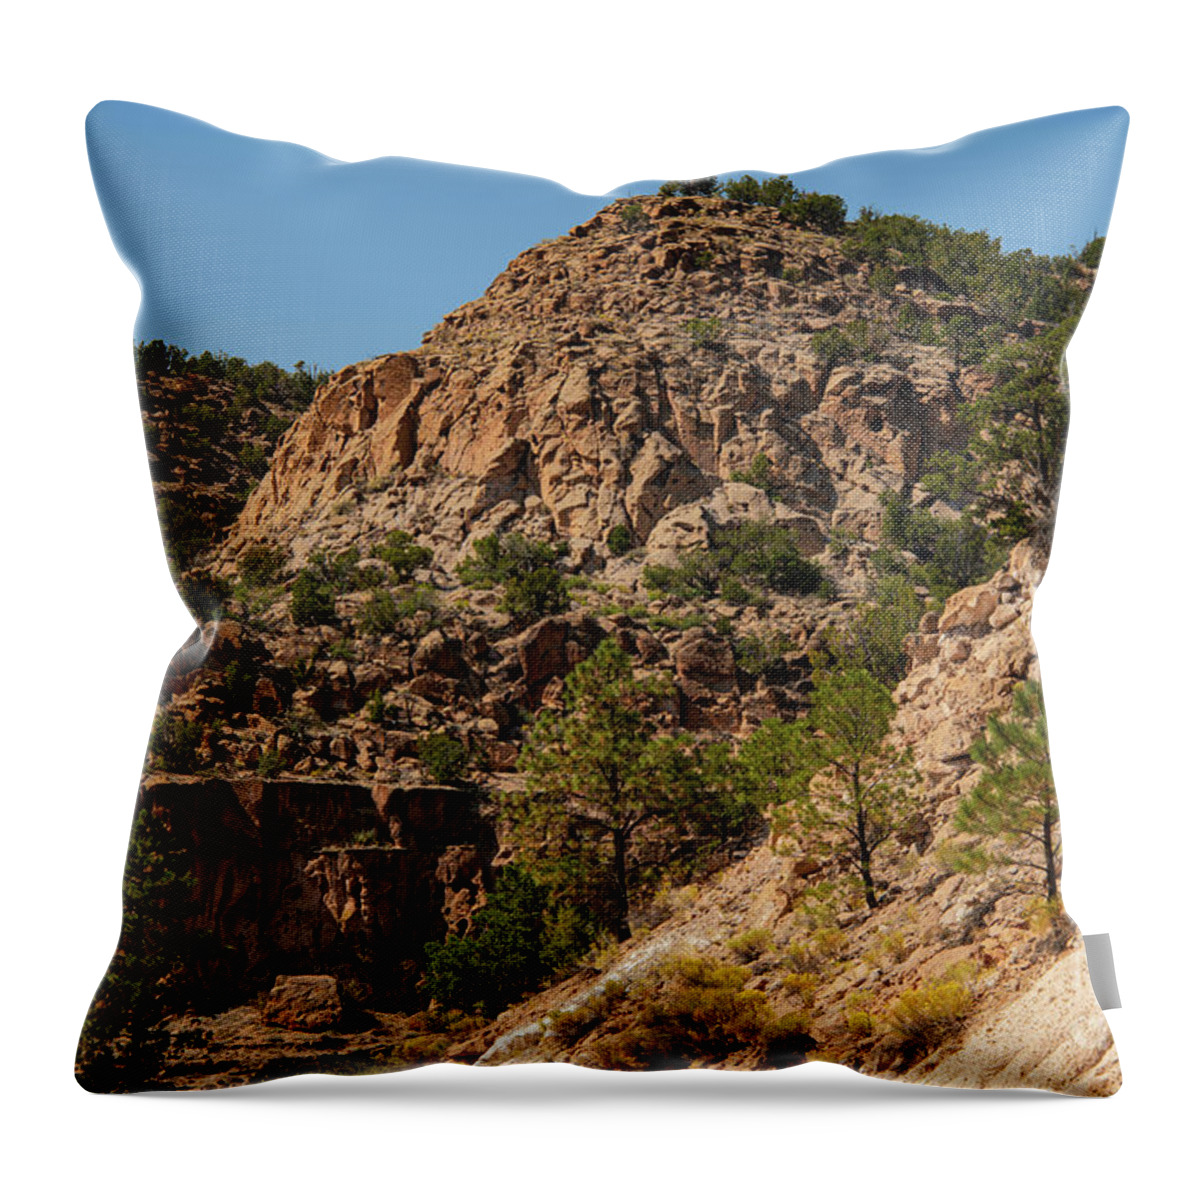 White Rock Throw Pillow featuring the photograph New Mexico Canyon Landscape One by Bob Phillips